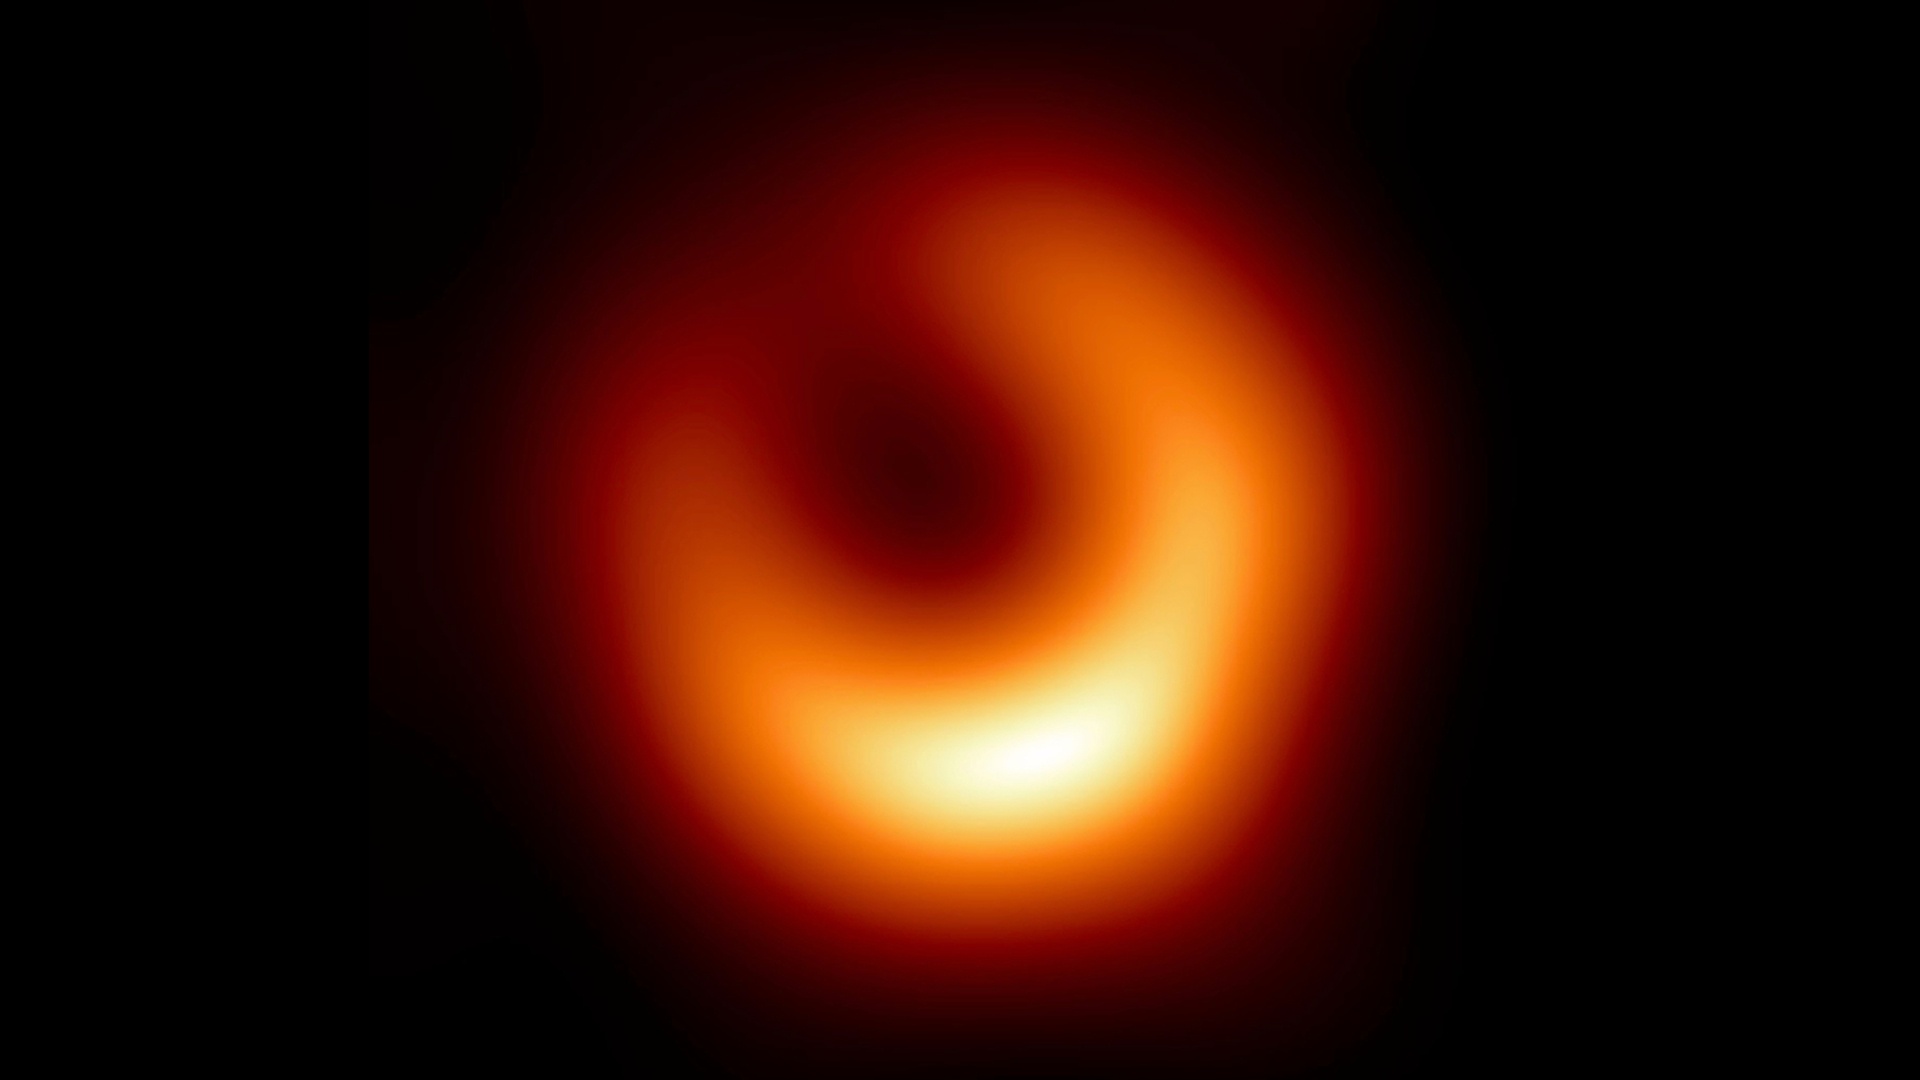 We spent six years processing images of black holes to come to the conclusion that Einstein was right